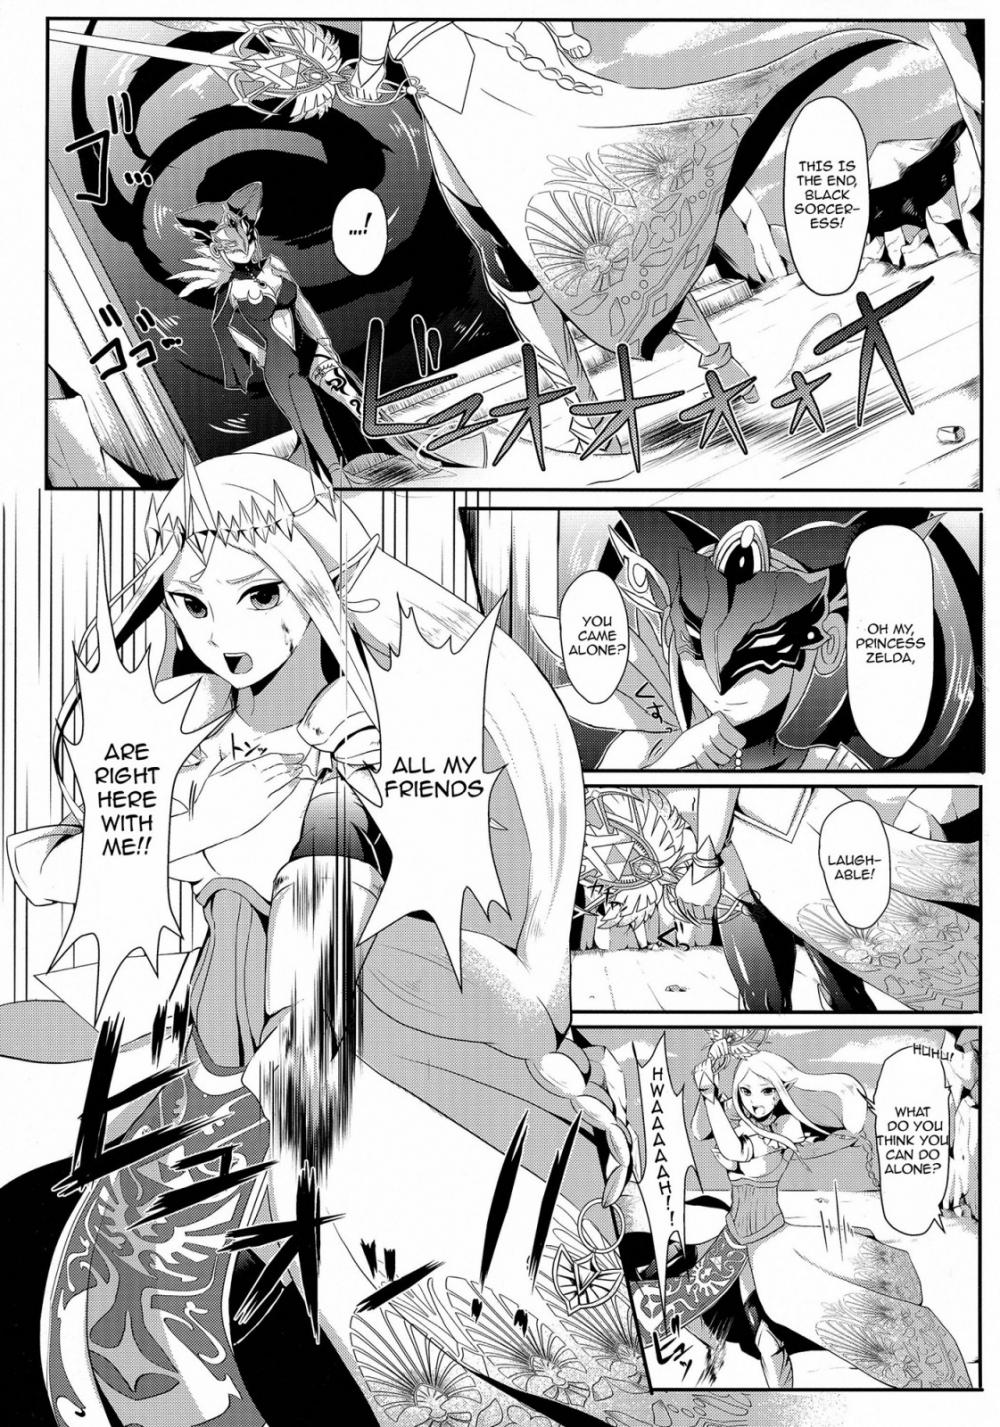 Sexy Hentai Time - Time Travel - Futanari Princess Zelda is Out of Control!-Read-Hentai Manga  Hentai Comic - Page: 2 - Online porn video at mobile